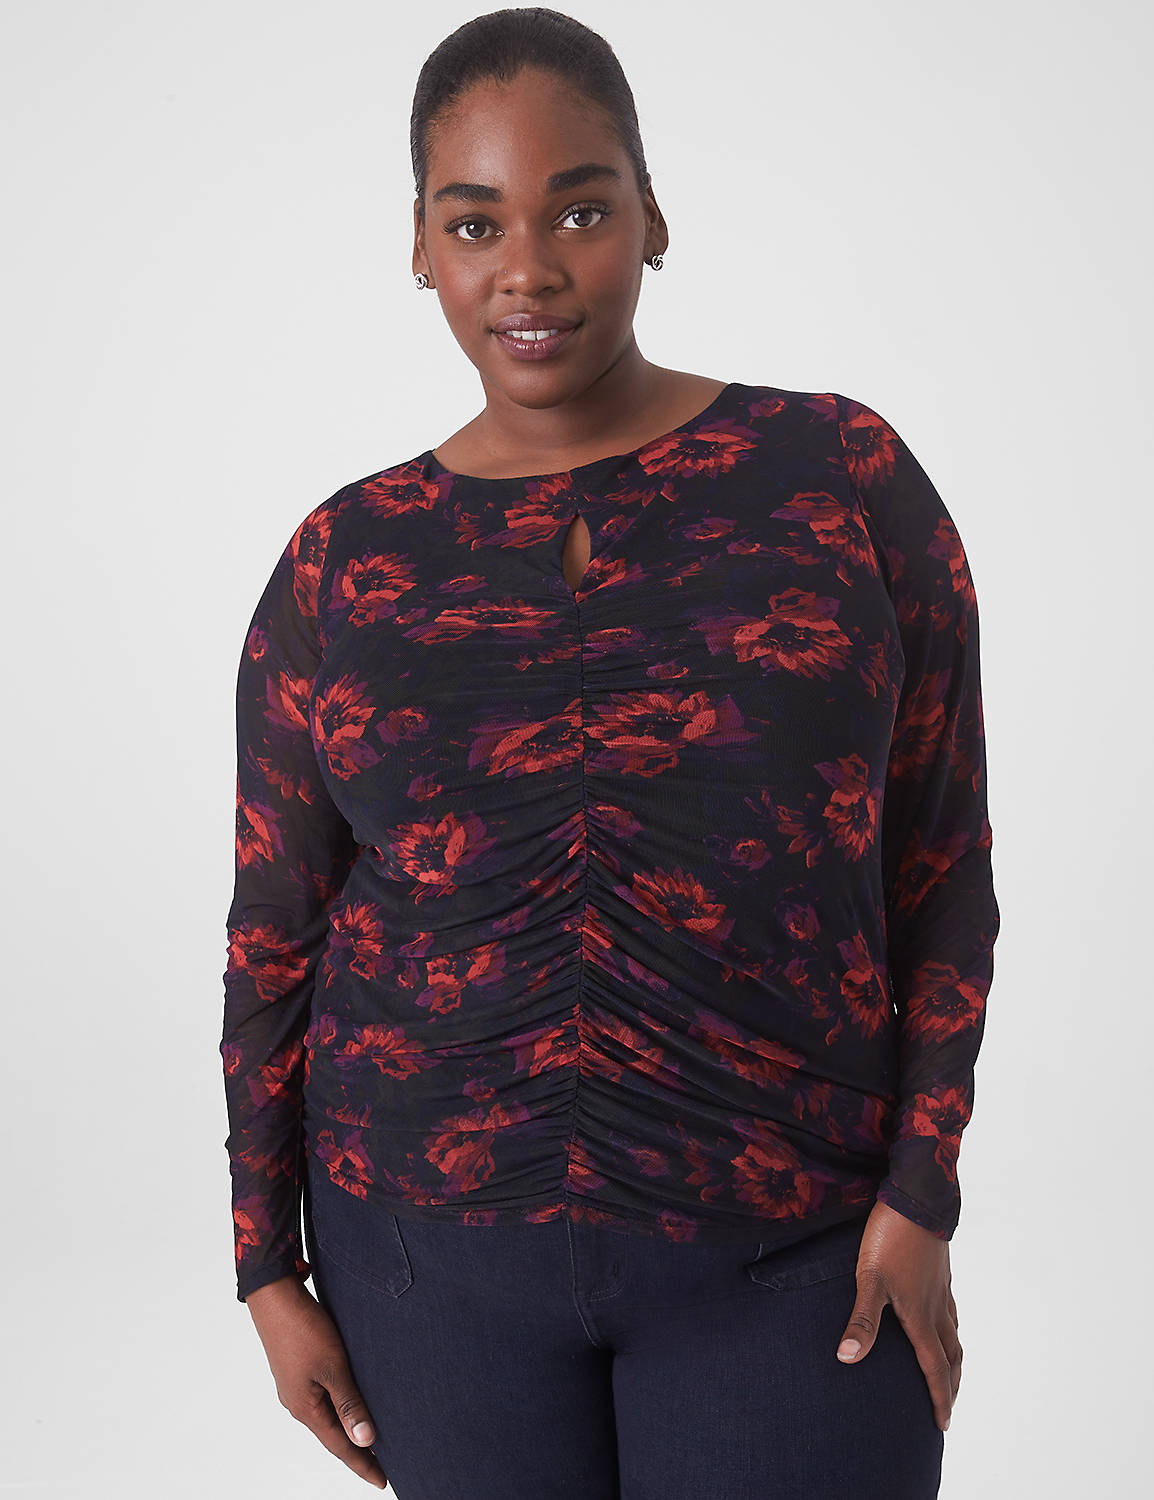 Fitted Long Sleeve Crew Neck Rouche Product Image 1